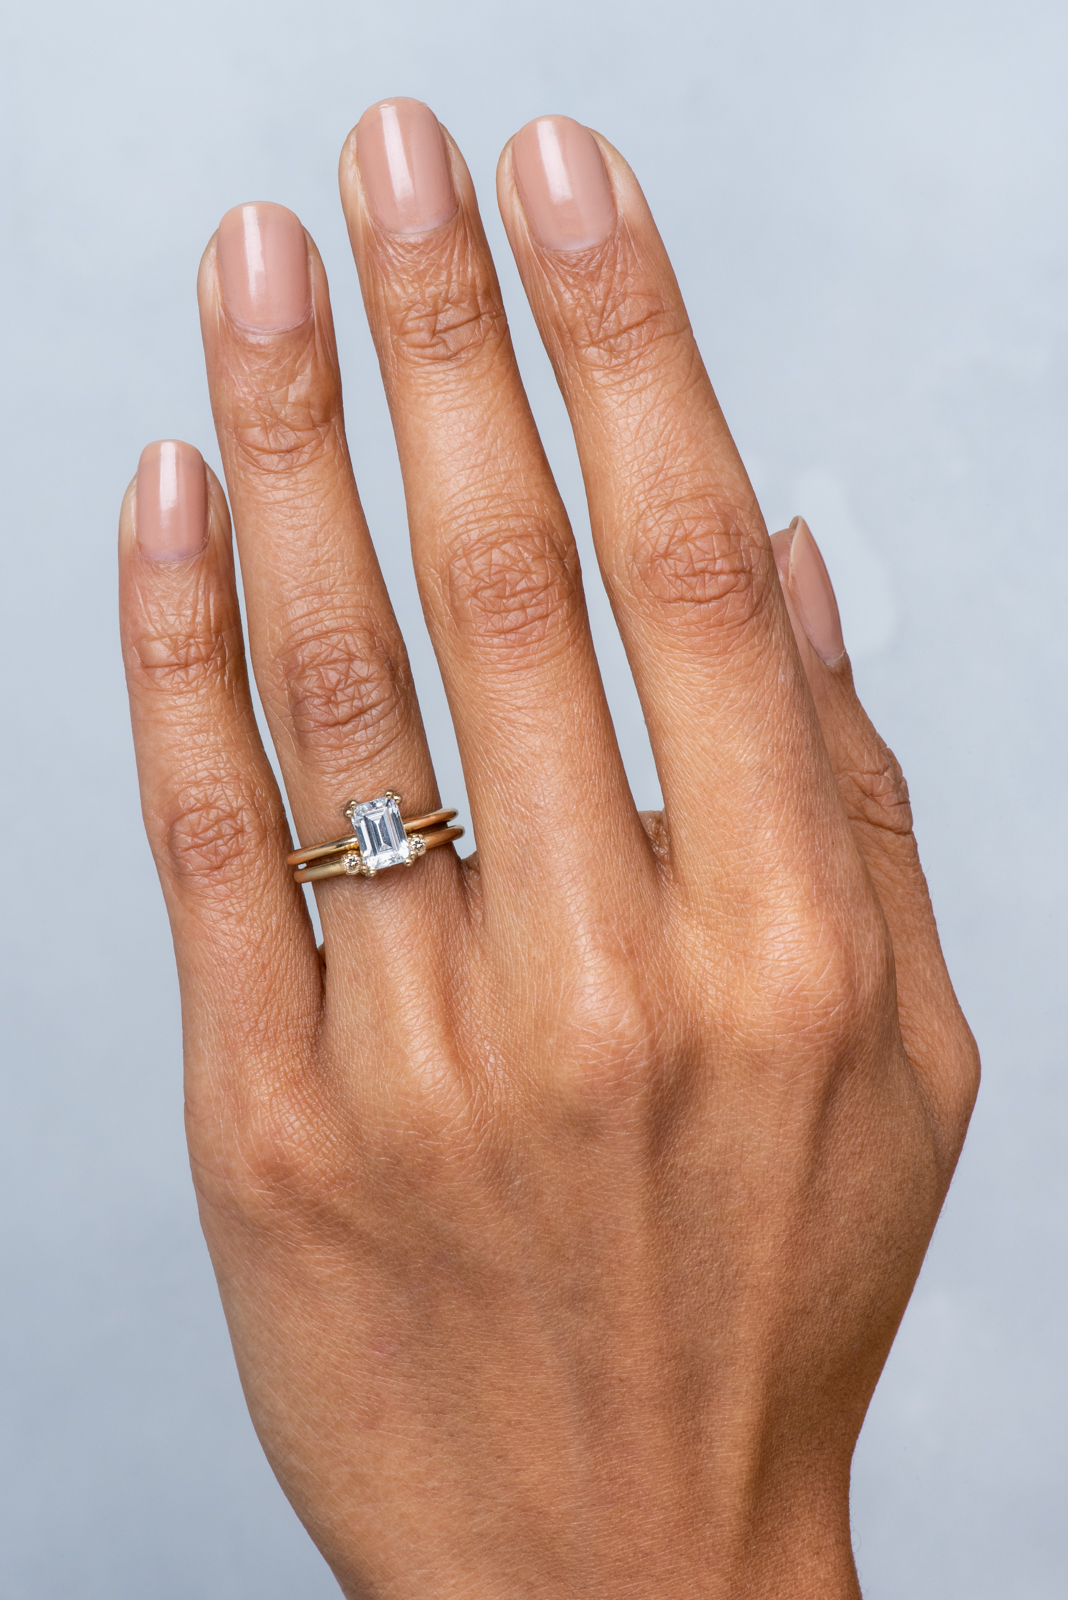 Spoiler Alert: Adding Your Engagement Ring to Your Homeowner's Insurance  Just Doesn't Cut It